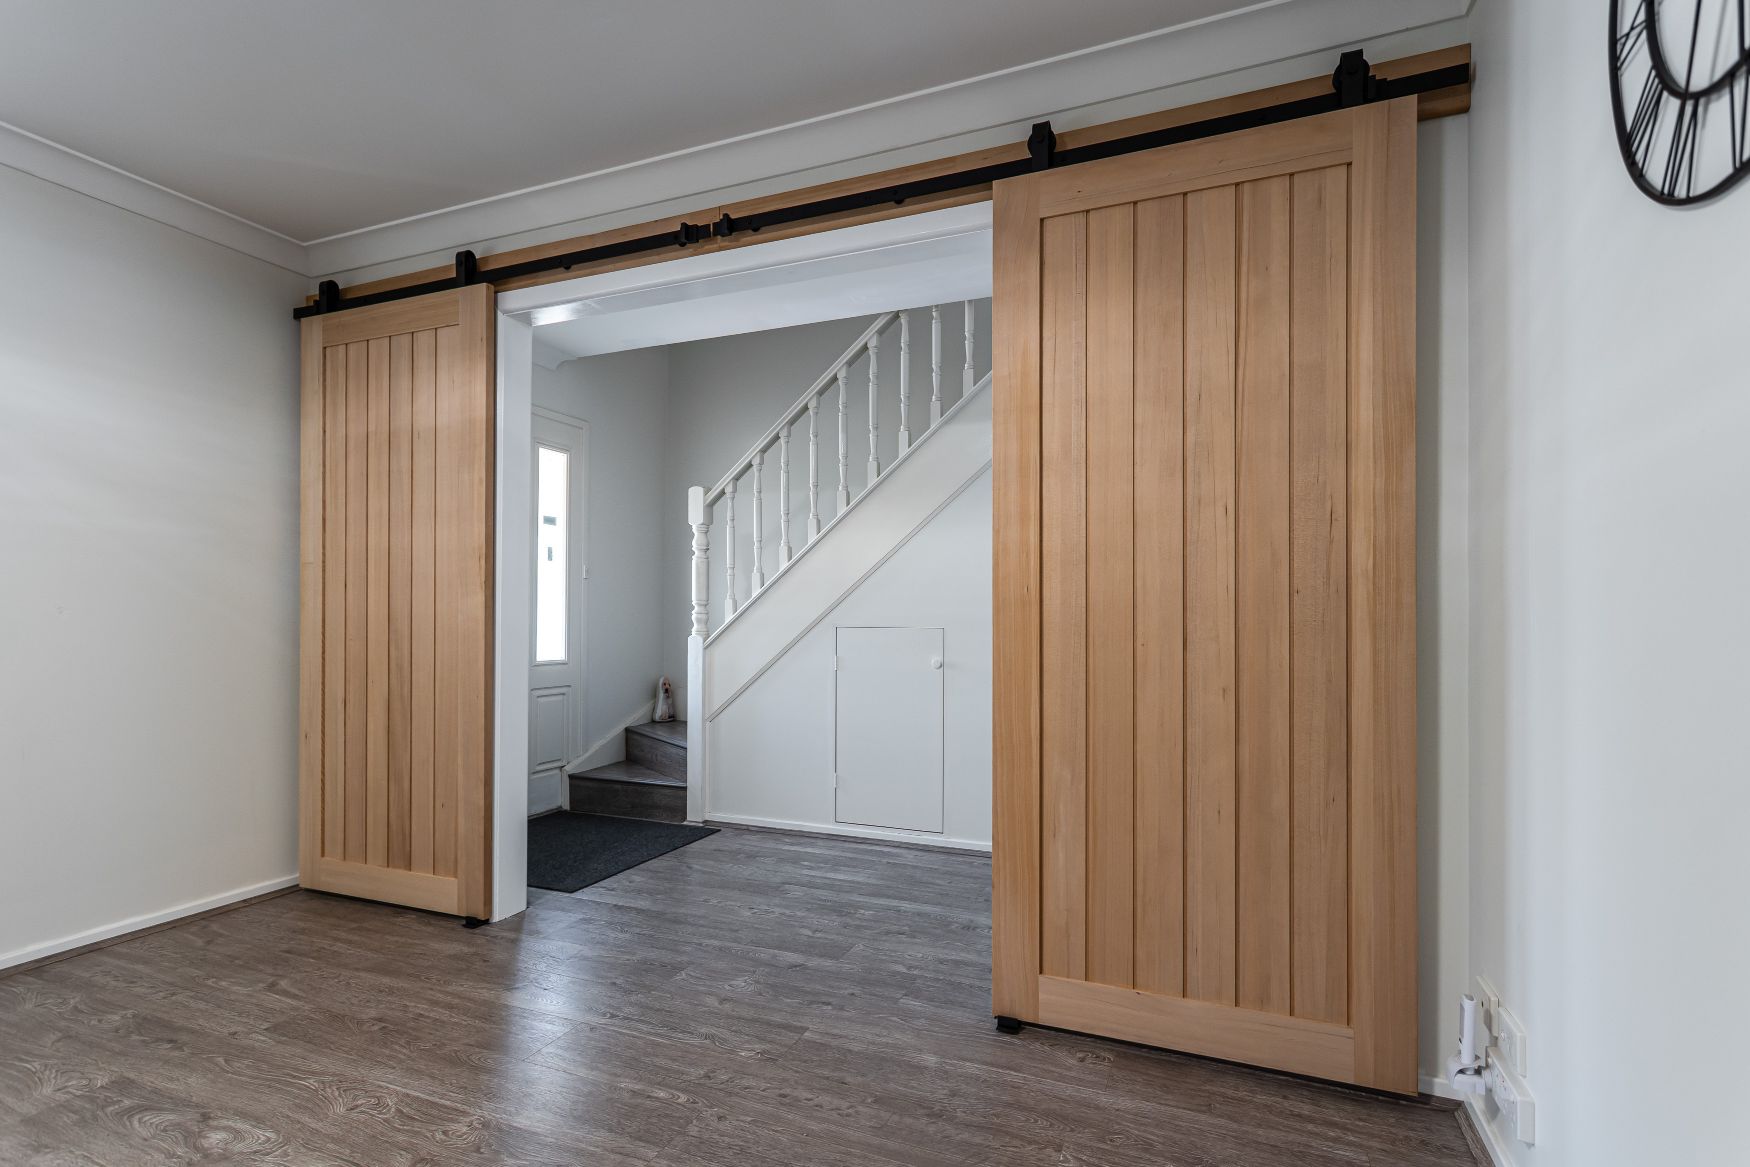 Internal Barn Double Door in Natural Finish with Black Carbon Steel Tracks